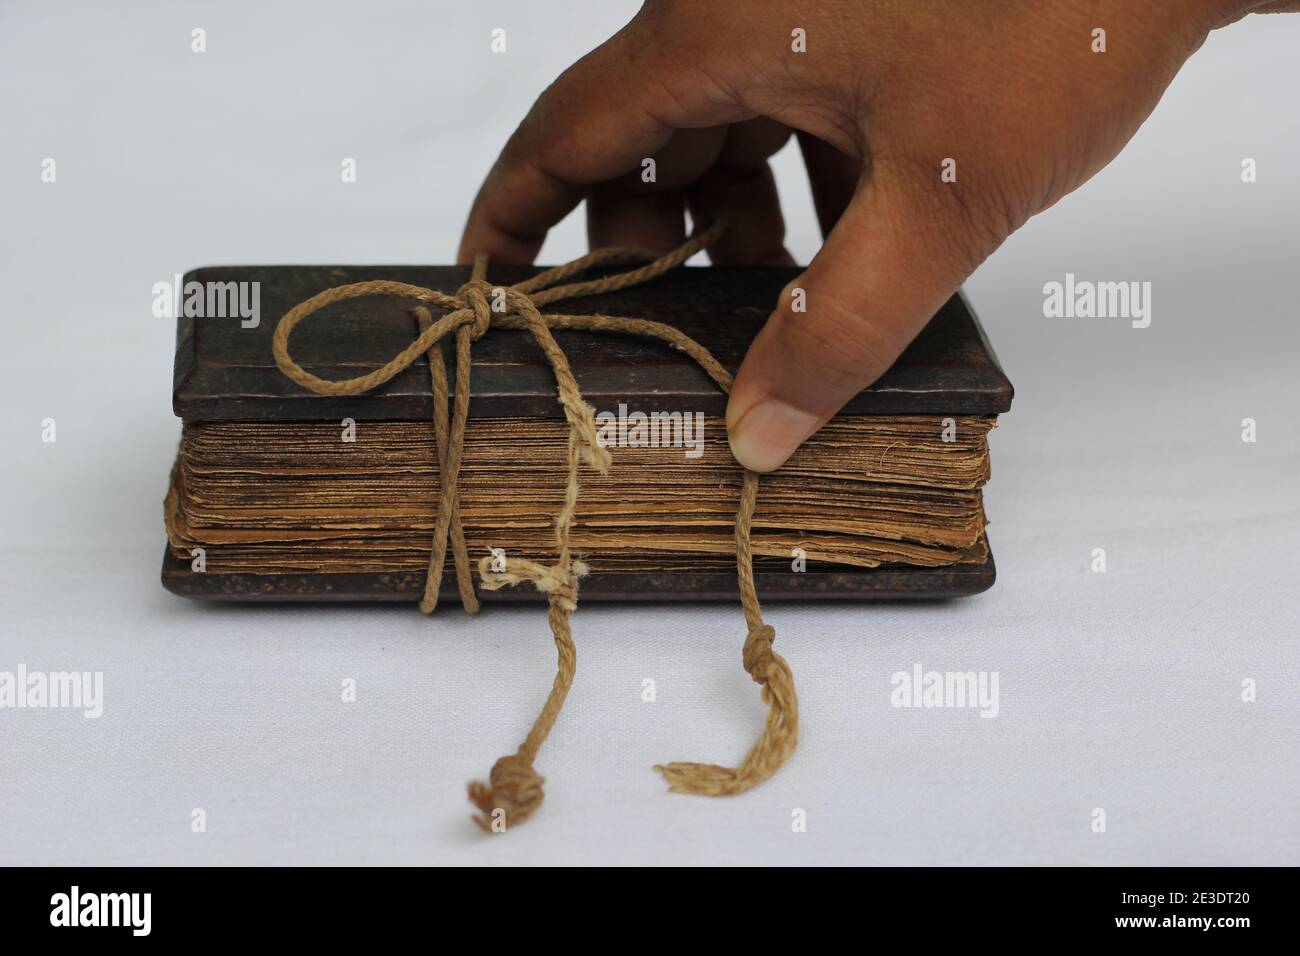 Old Palm leaf manuscripts bind together in a book and human hand holding it Stock Photo